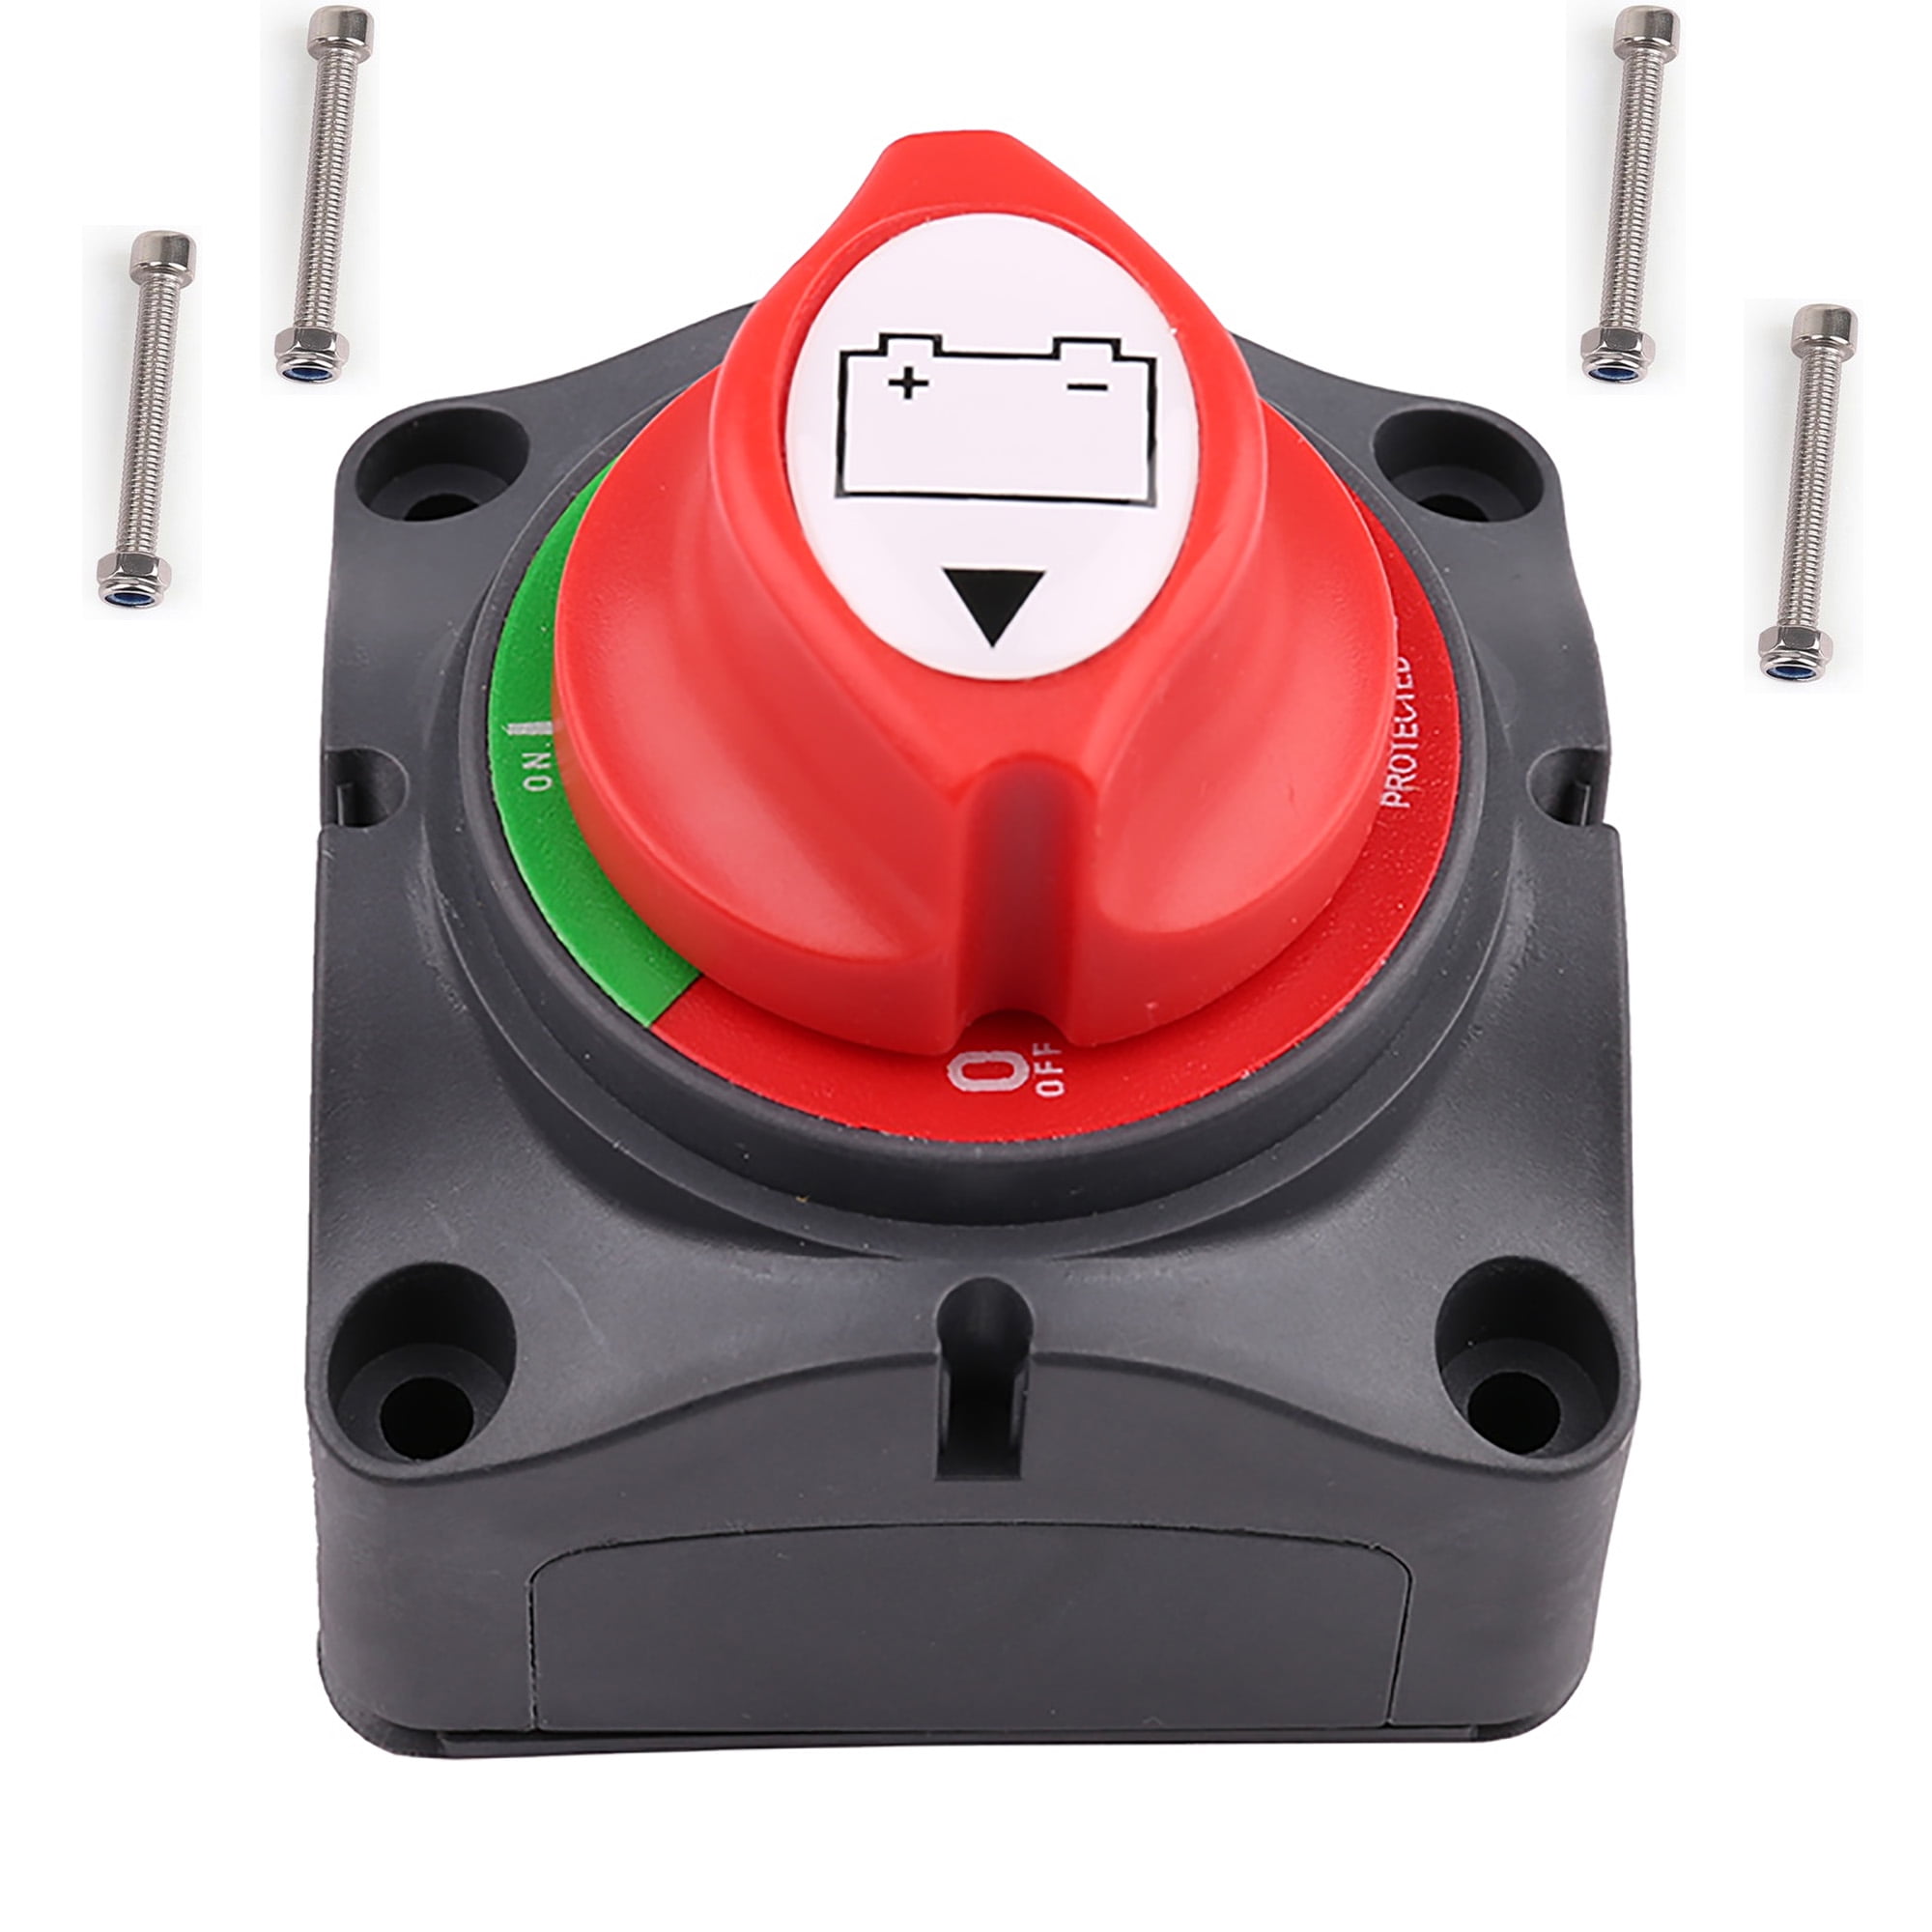 Battery Disconnect Switch Marine Battery Disconnect Switch 6V 12V 24V 48V 275/1250 Amp Battery Kill Switch,Waterproof Heavy Duty Battery Isolator Switch,Cut Off Power for Marine Boat RV ATV Auto Truck 